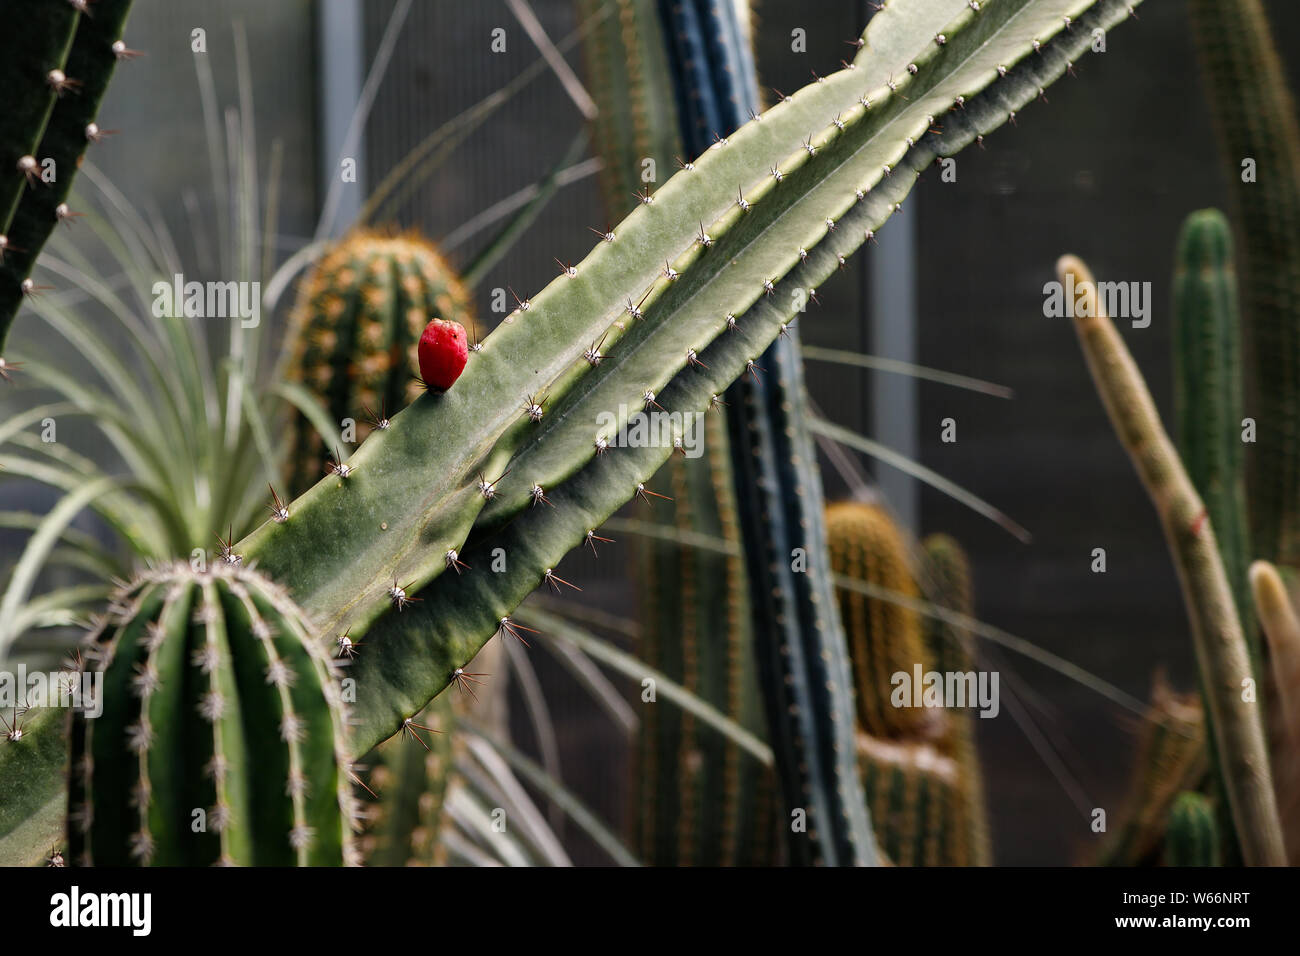 Beautiful blooming desert flower of cactus. Cactus is studded with many small bright pink flowers. Stock Photo